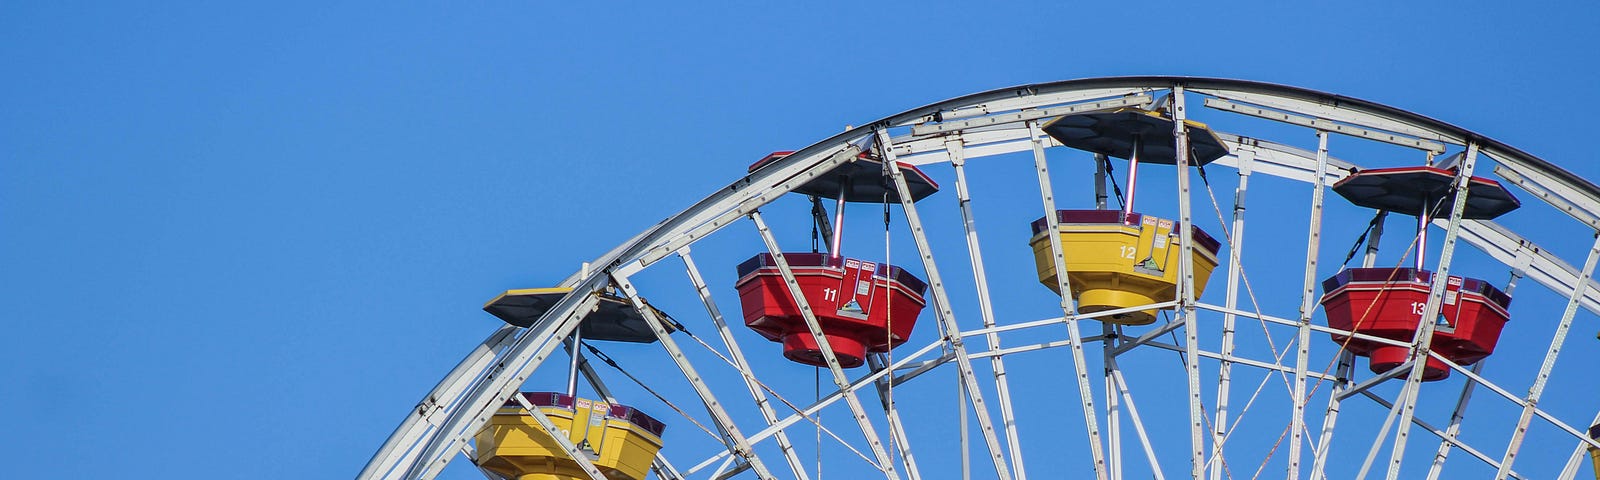 The arch of a Ferris Wheel, compartments raised to the clear blue sky, suspends tiny passengers.